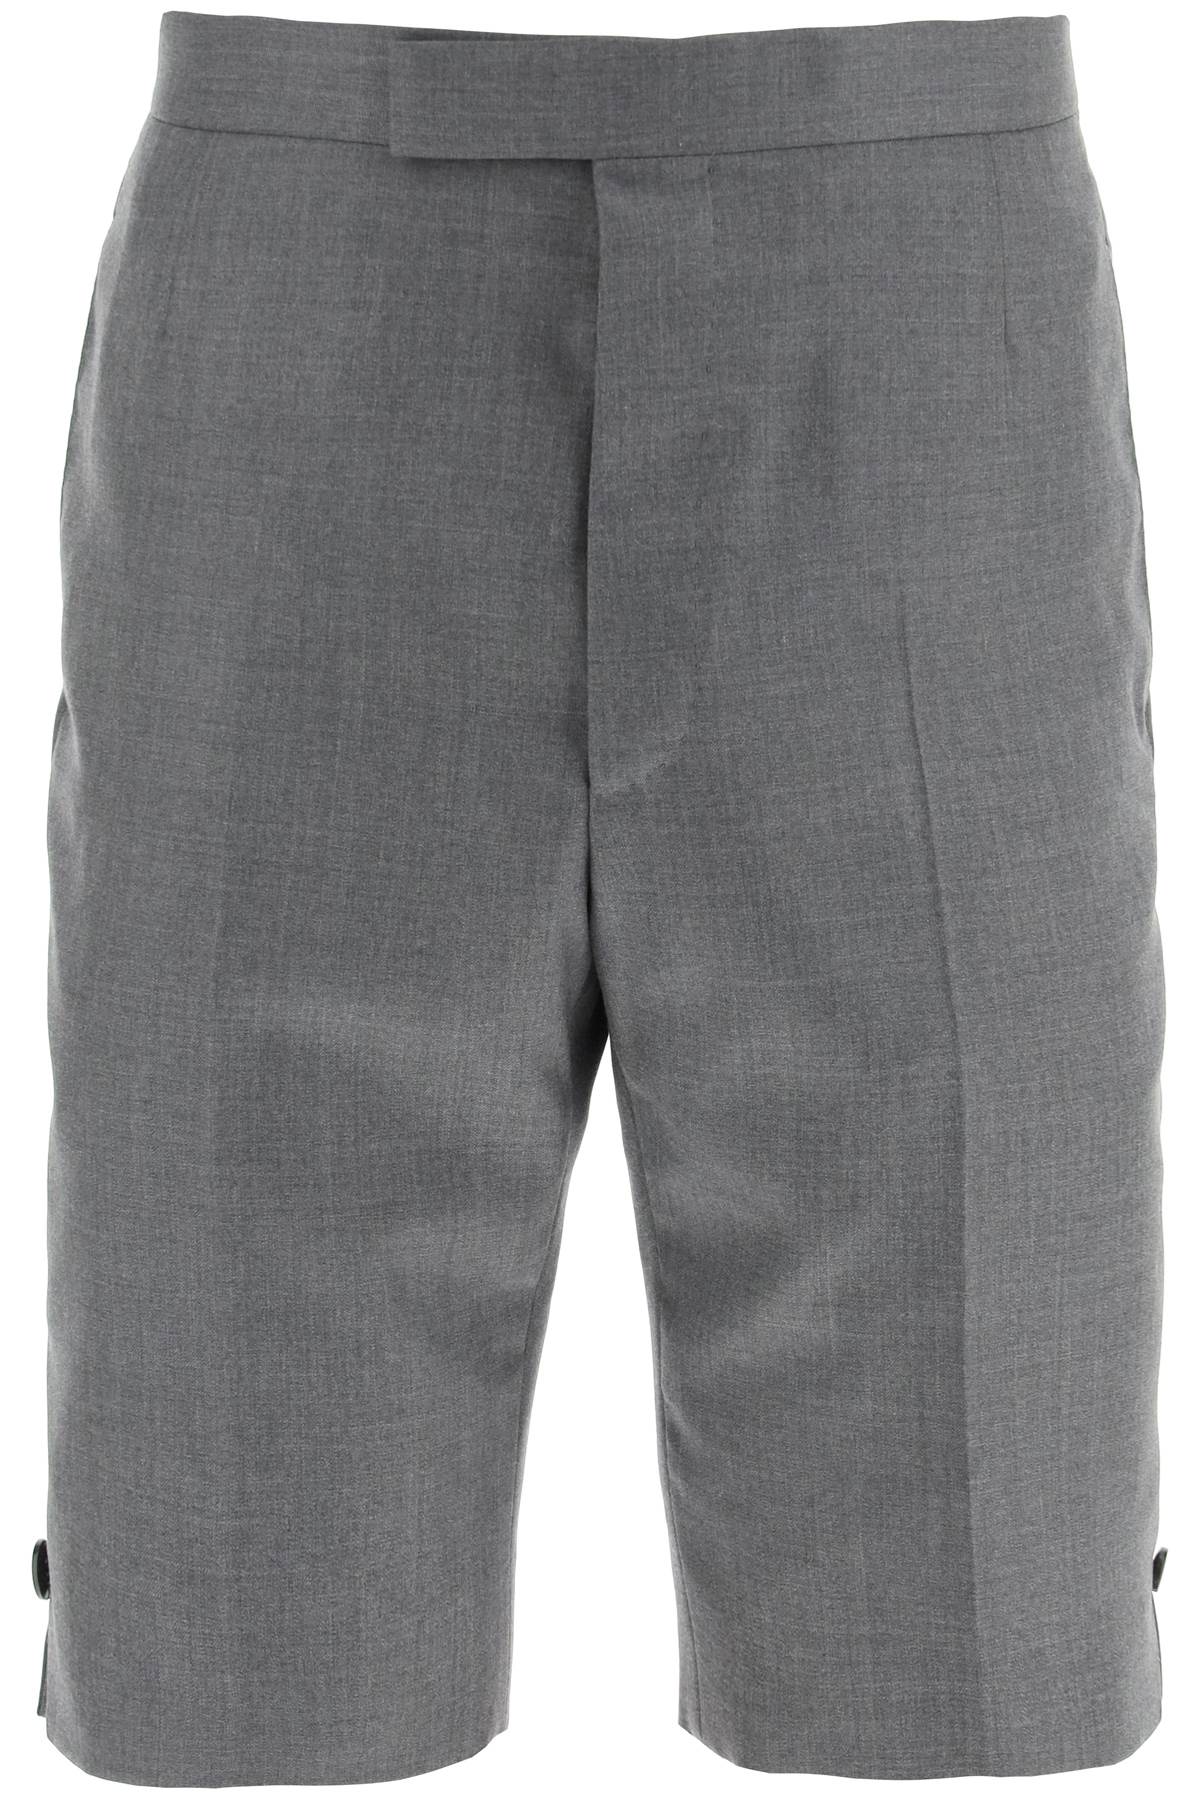 Thom browne super 120's wool shorts with back strap-0